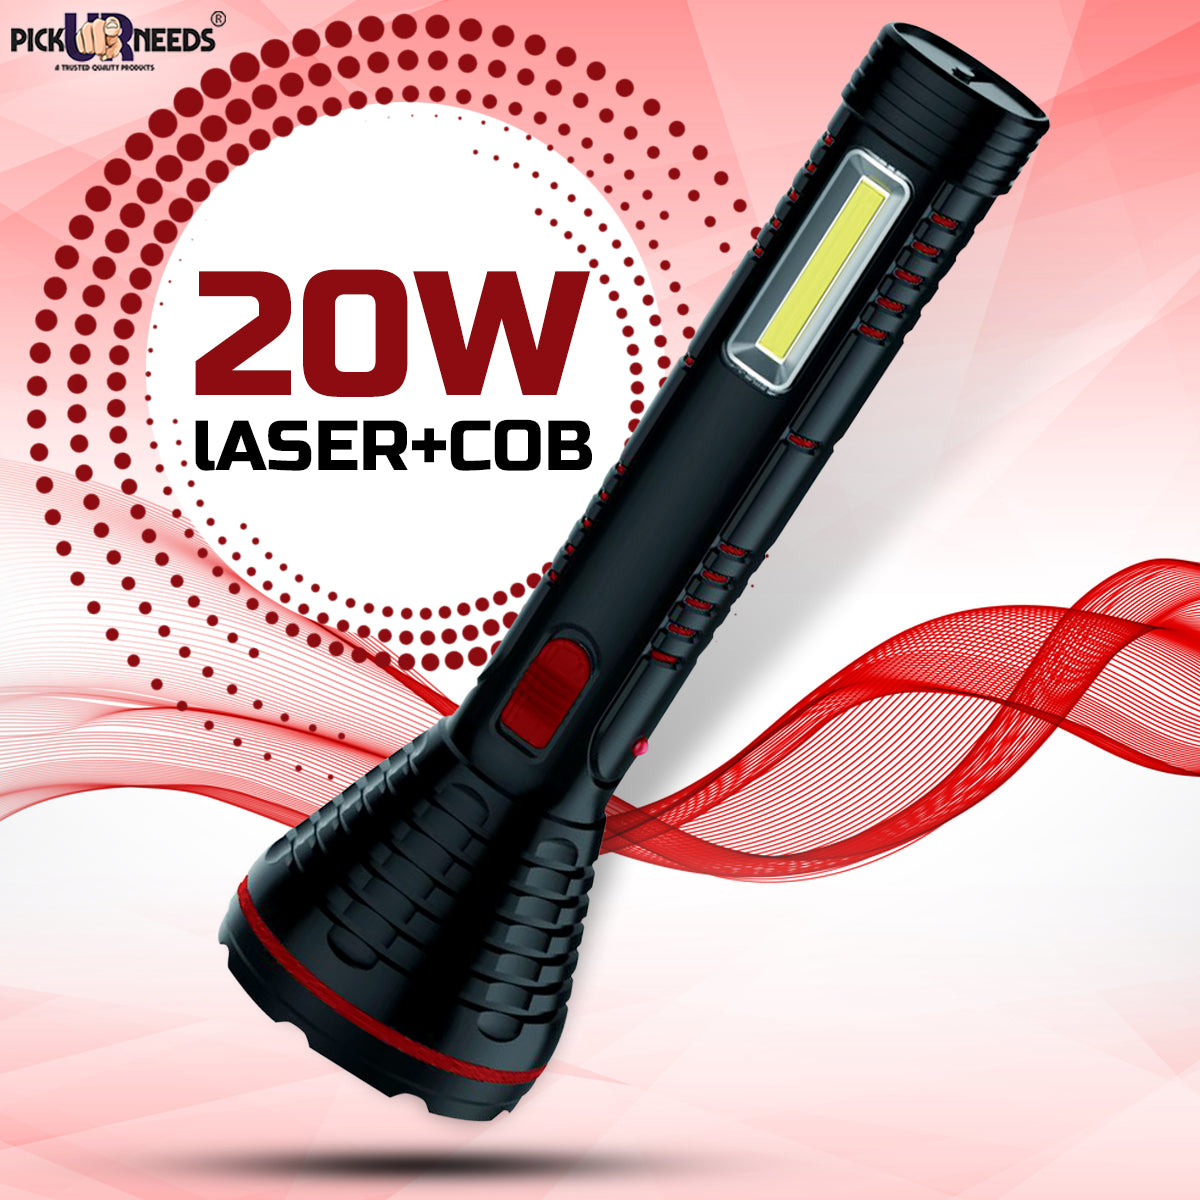 Pick Ur Needs Dual Power 2 in 1 Led 20 Watt Rechargeable Torch Light Long Range with Dual Battery Backup